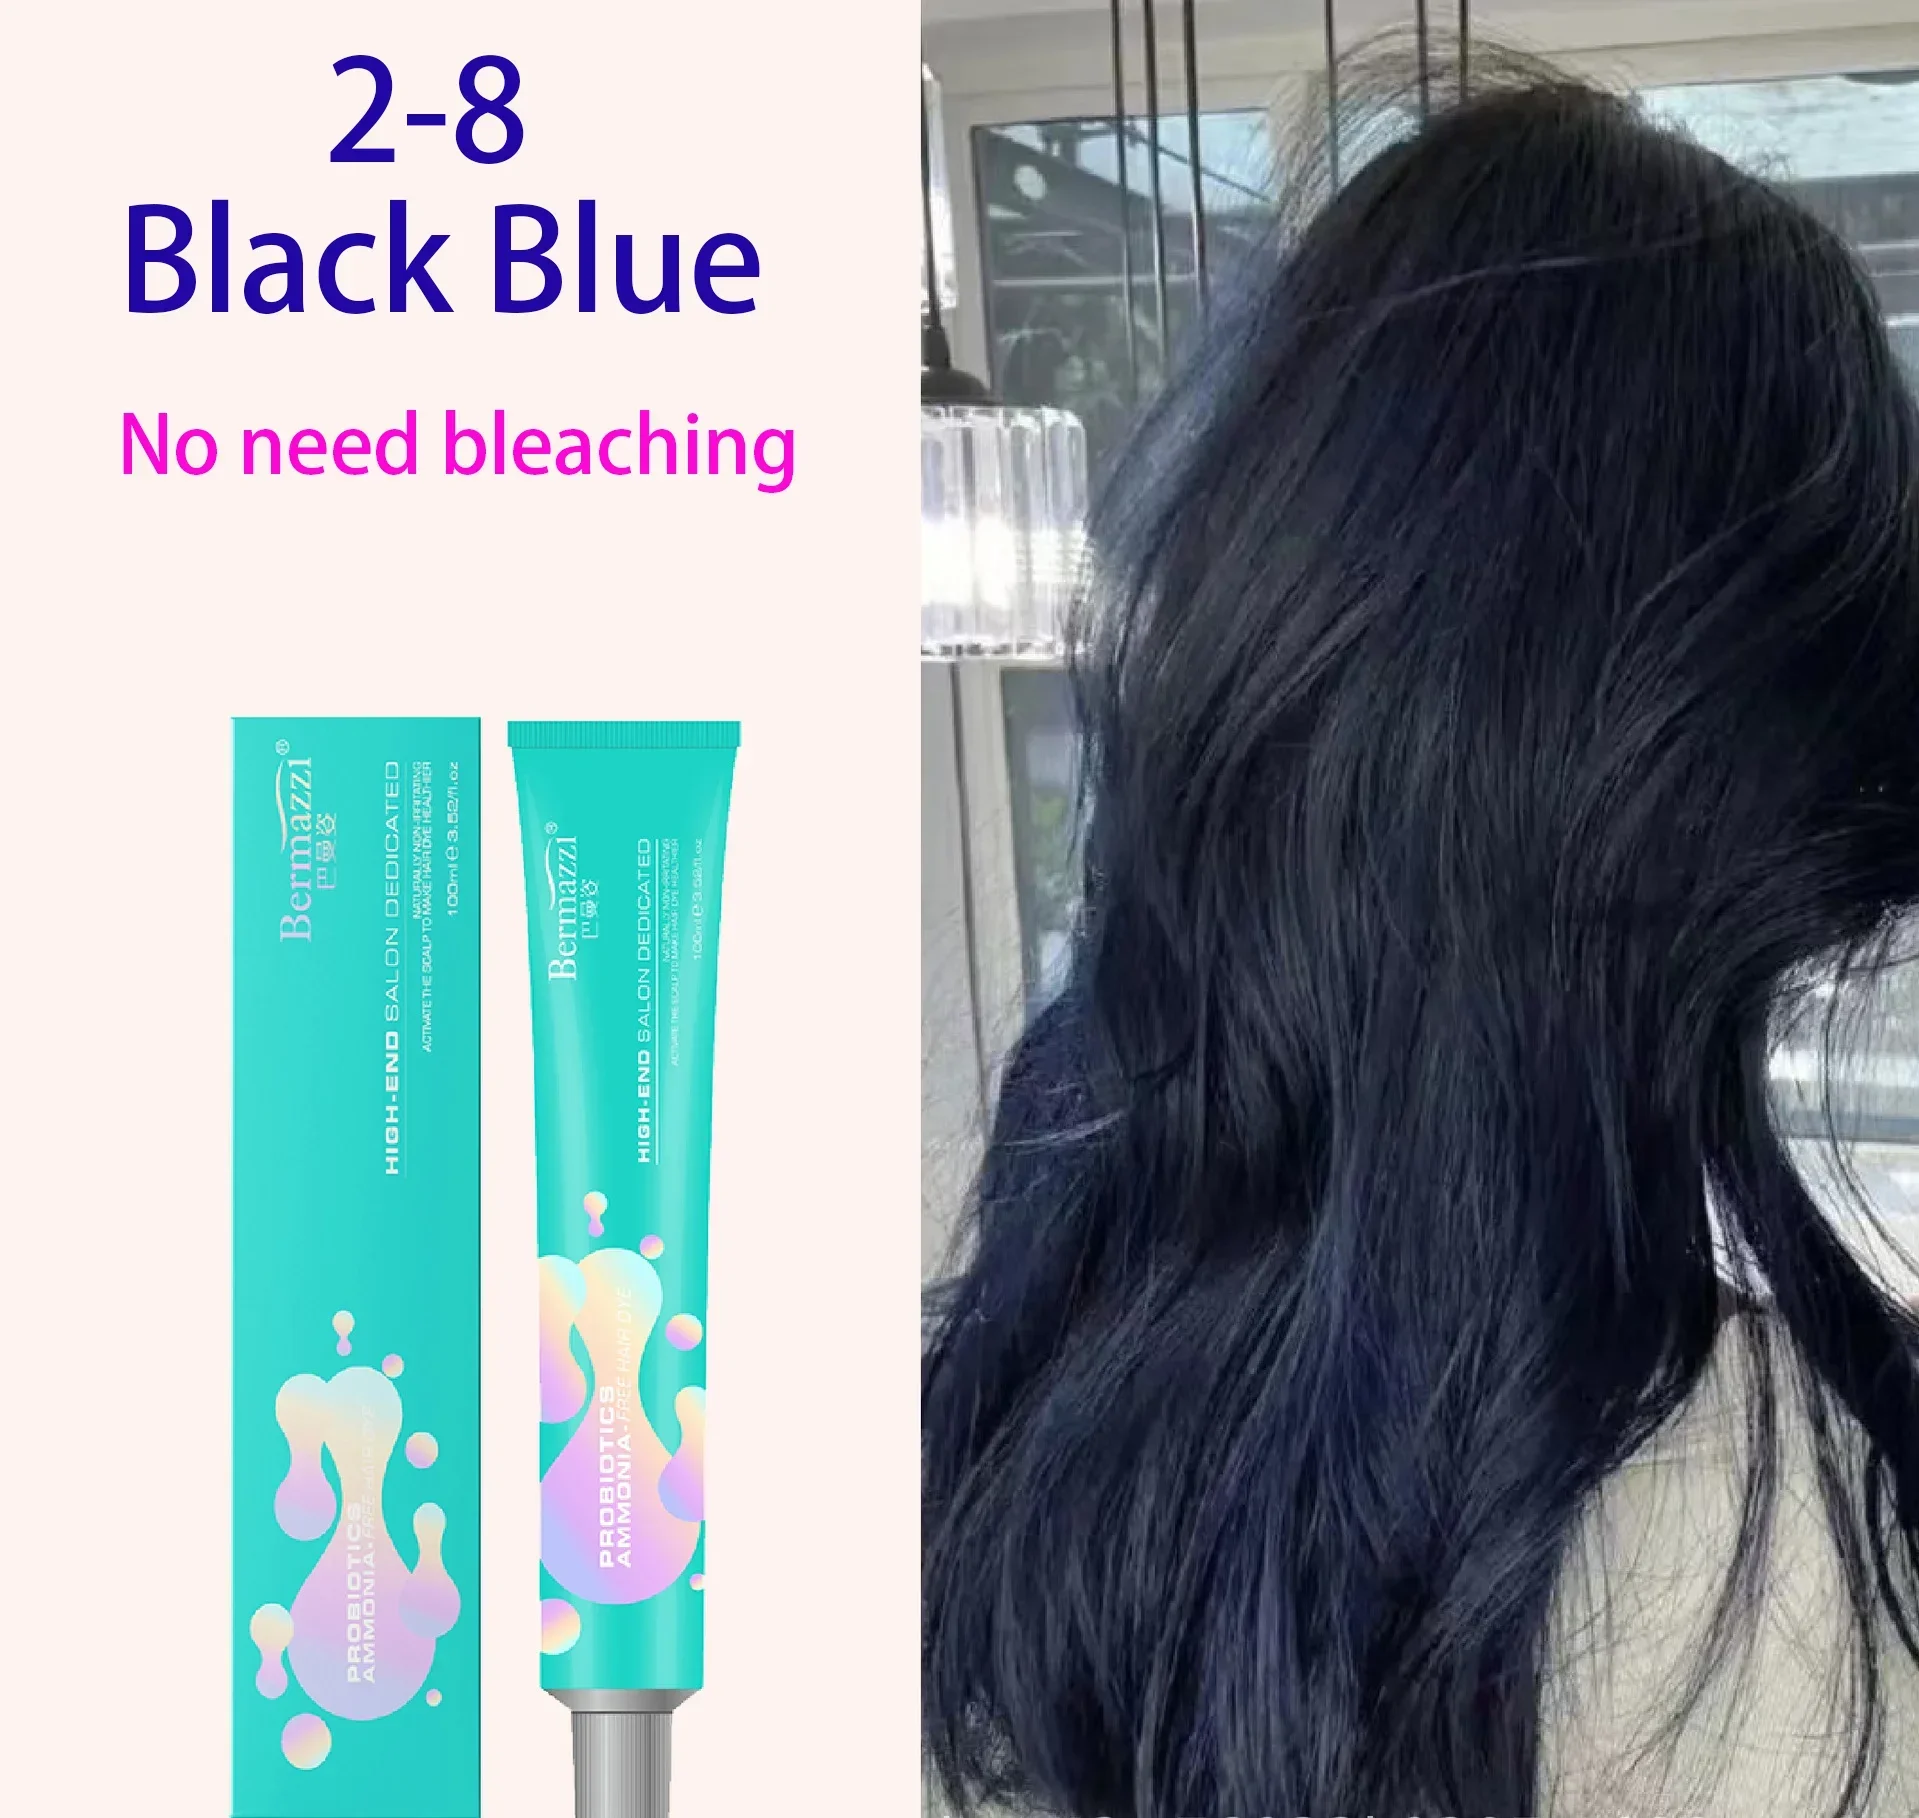 100ml Ammonia Free Plant Extracts Hair Paints Hair Dye Cream  Blue Black Permanent Fashion Hair Coloring Pigment best supplier rs485 online ammonia nitrogen water sensor for sewage plant